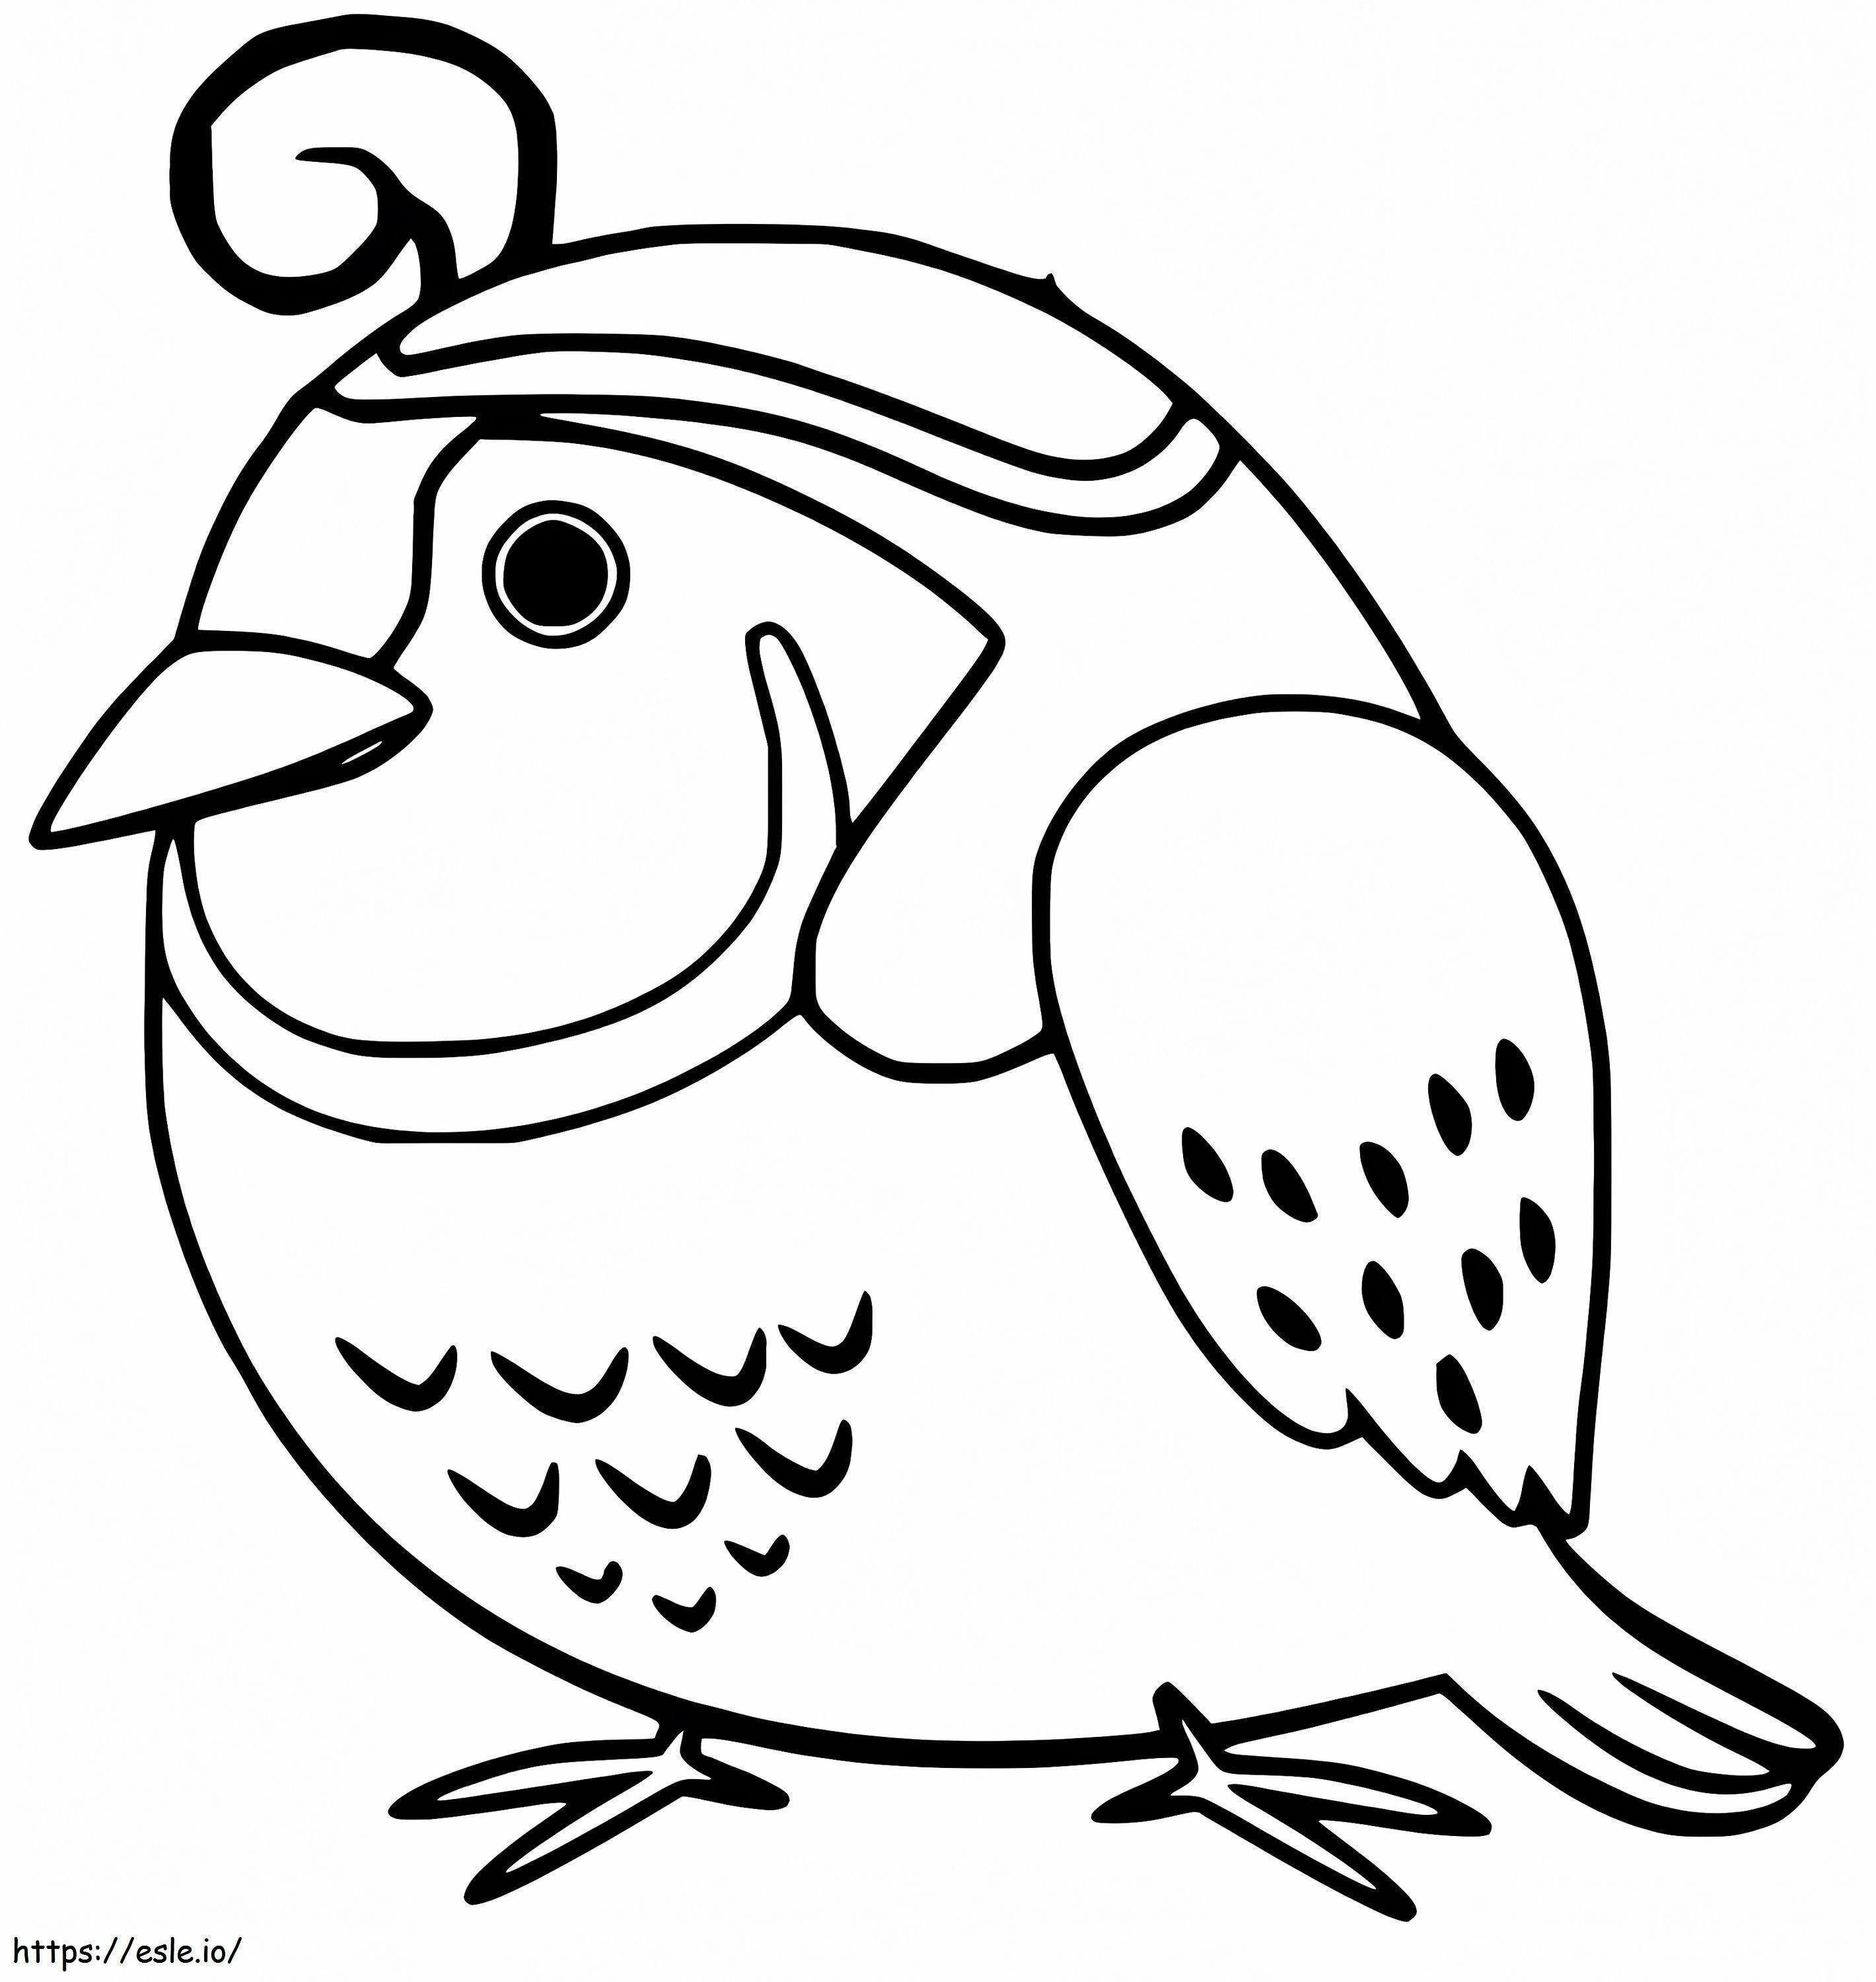 Baby Quail coloring page